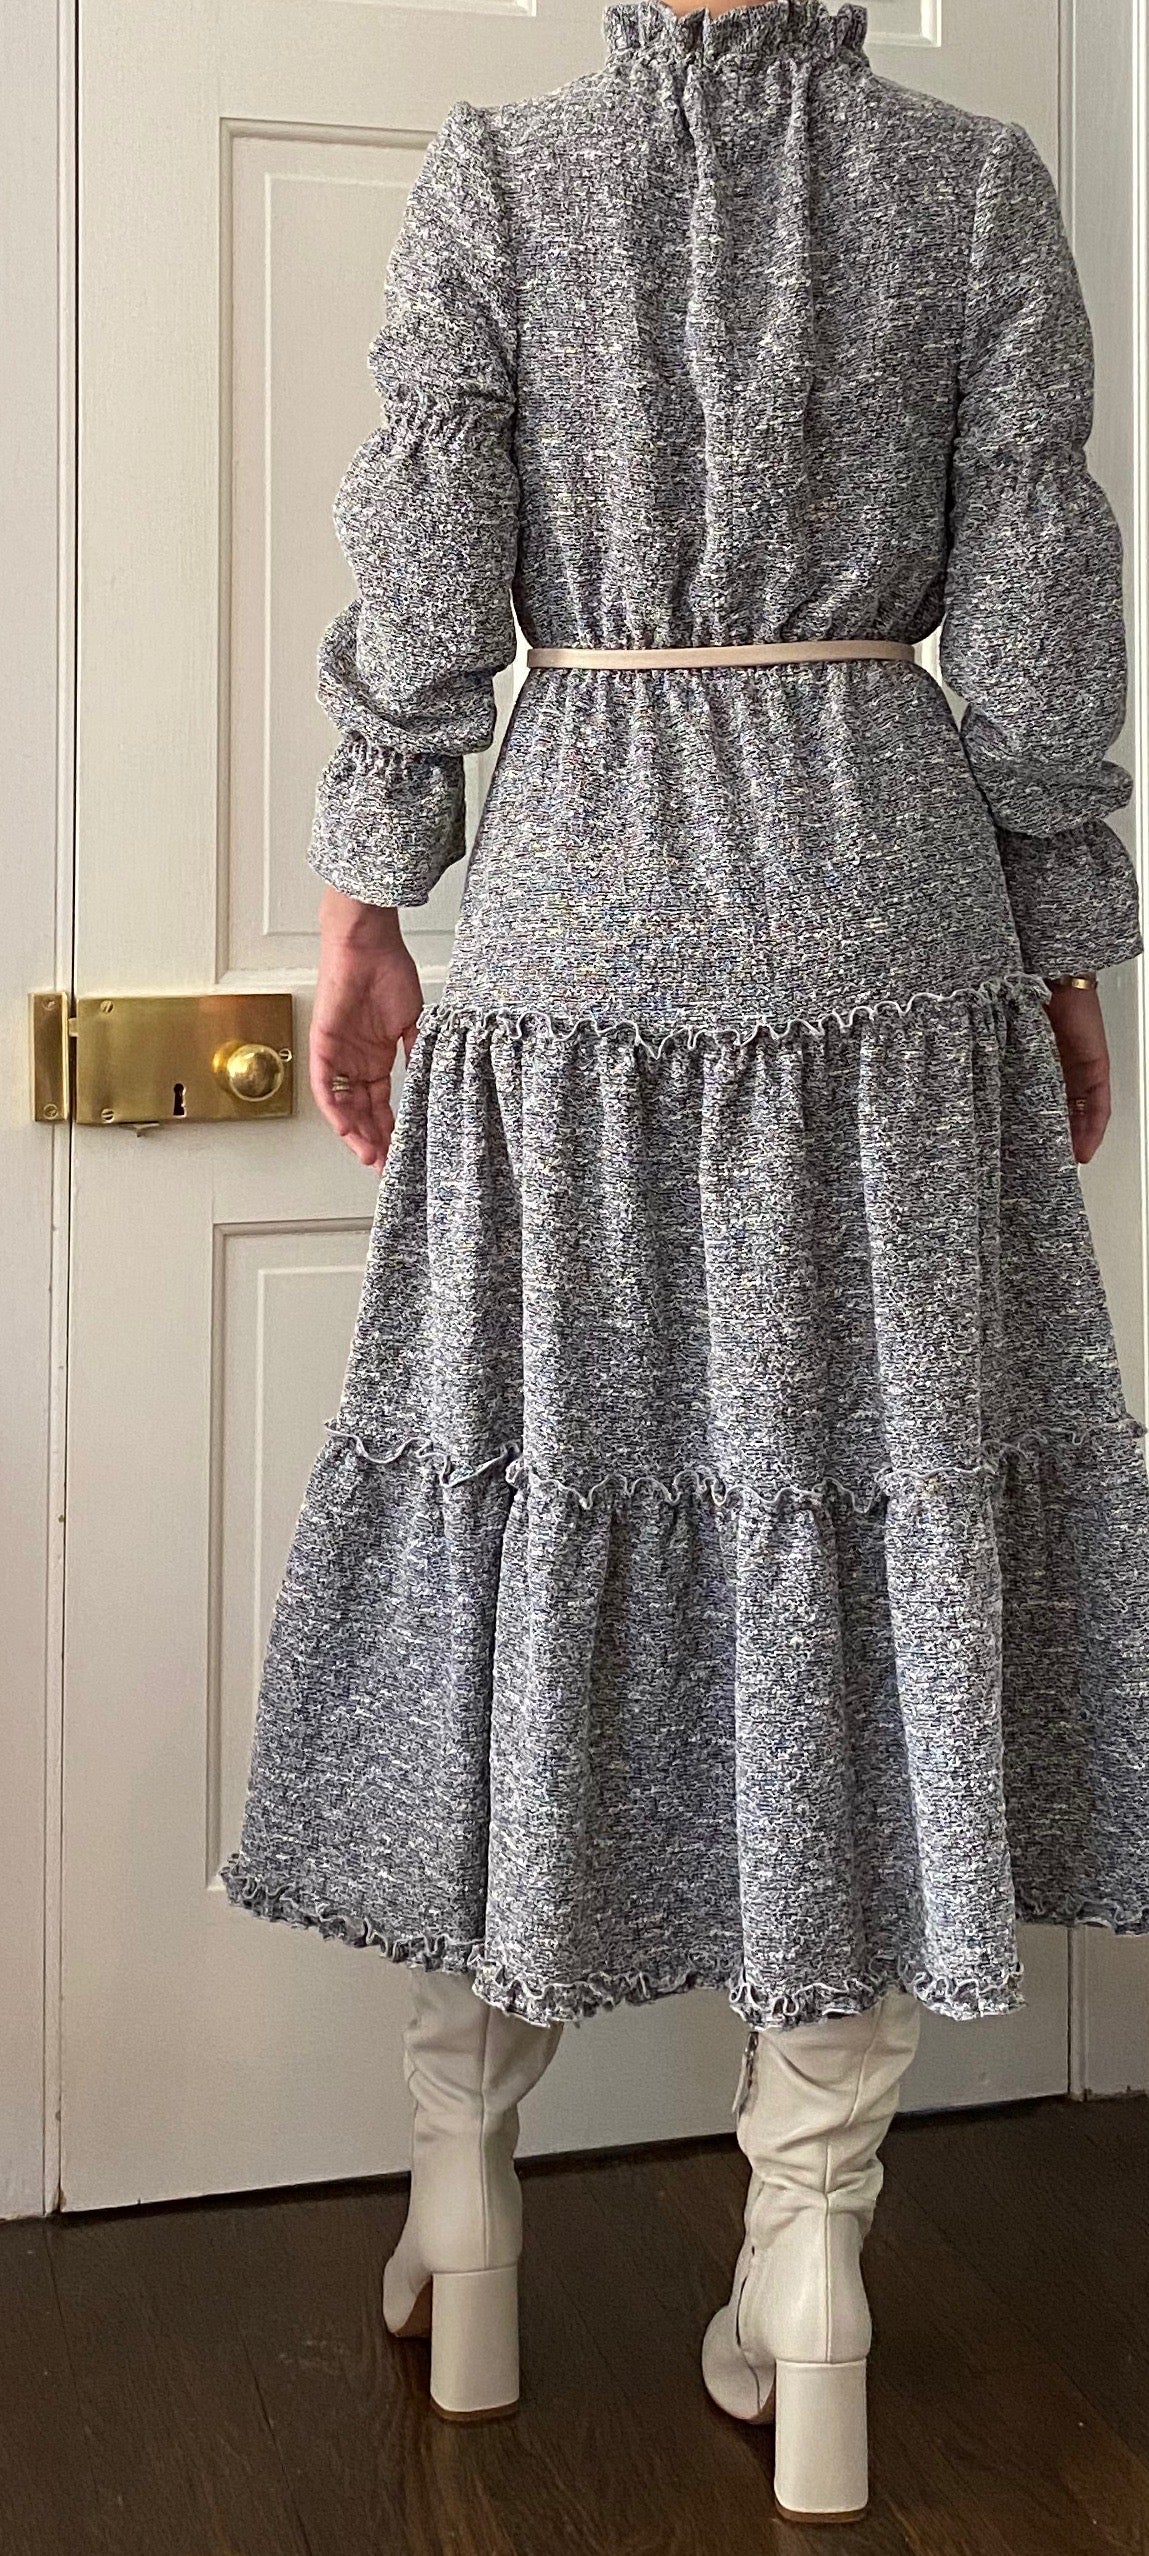 Alden Dress in Stretchy Tweed - CCH Collection